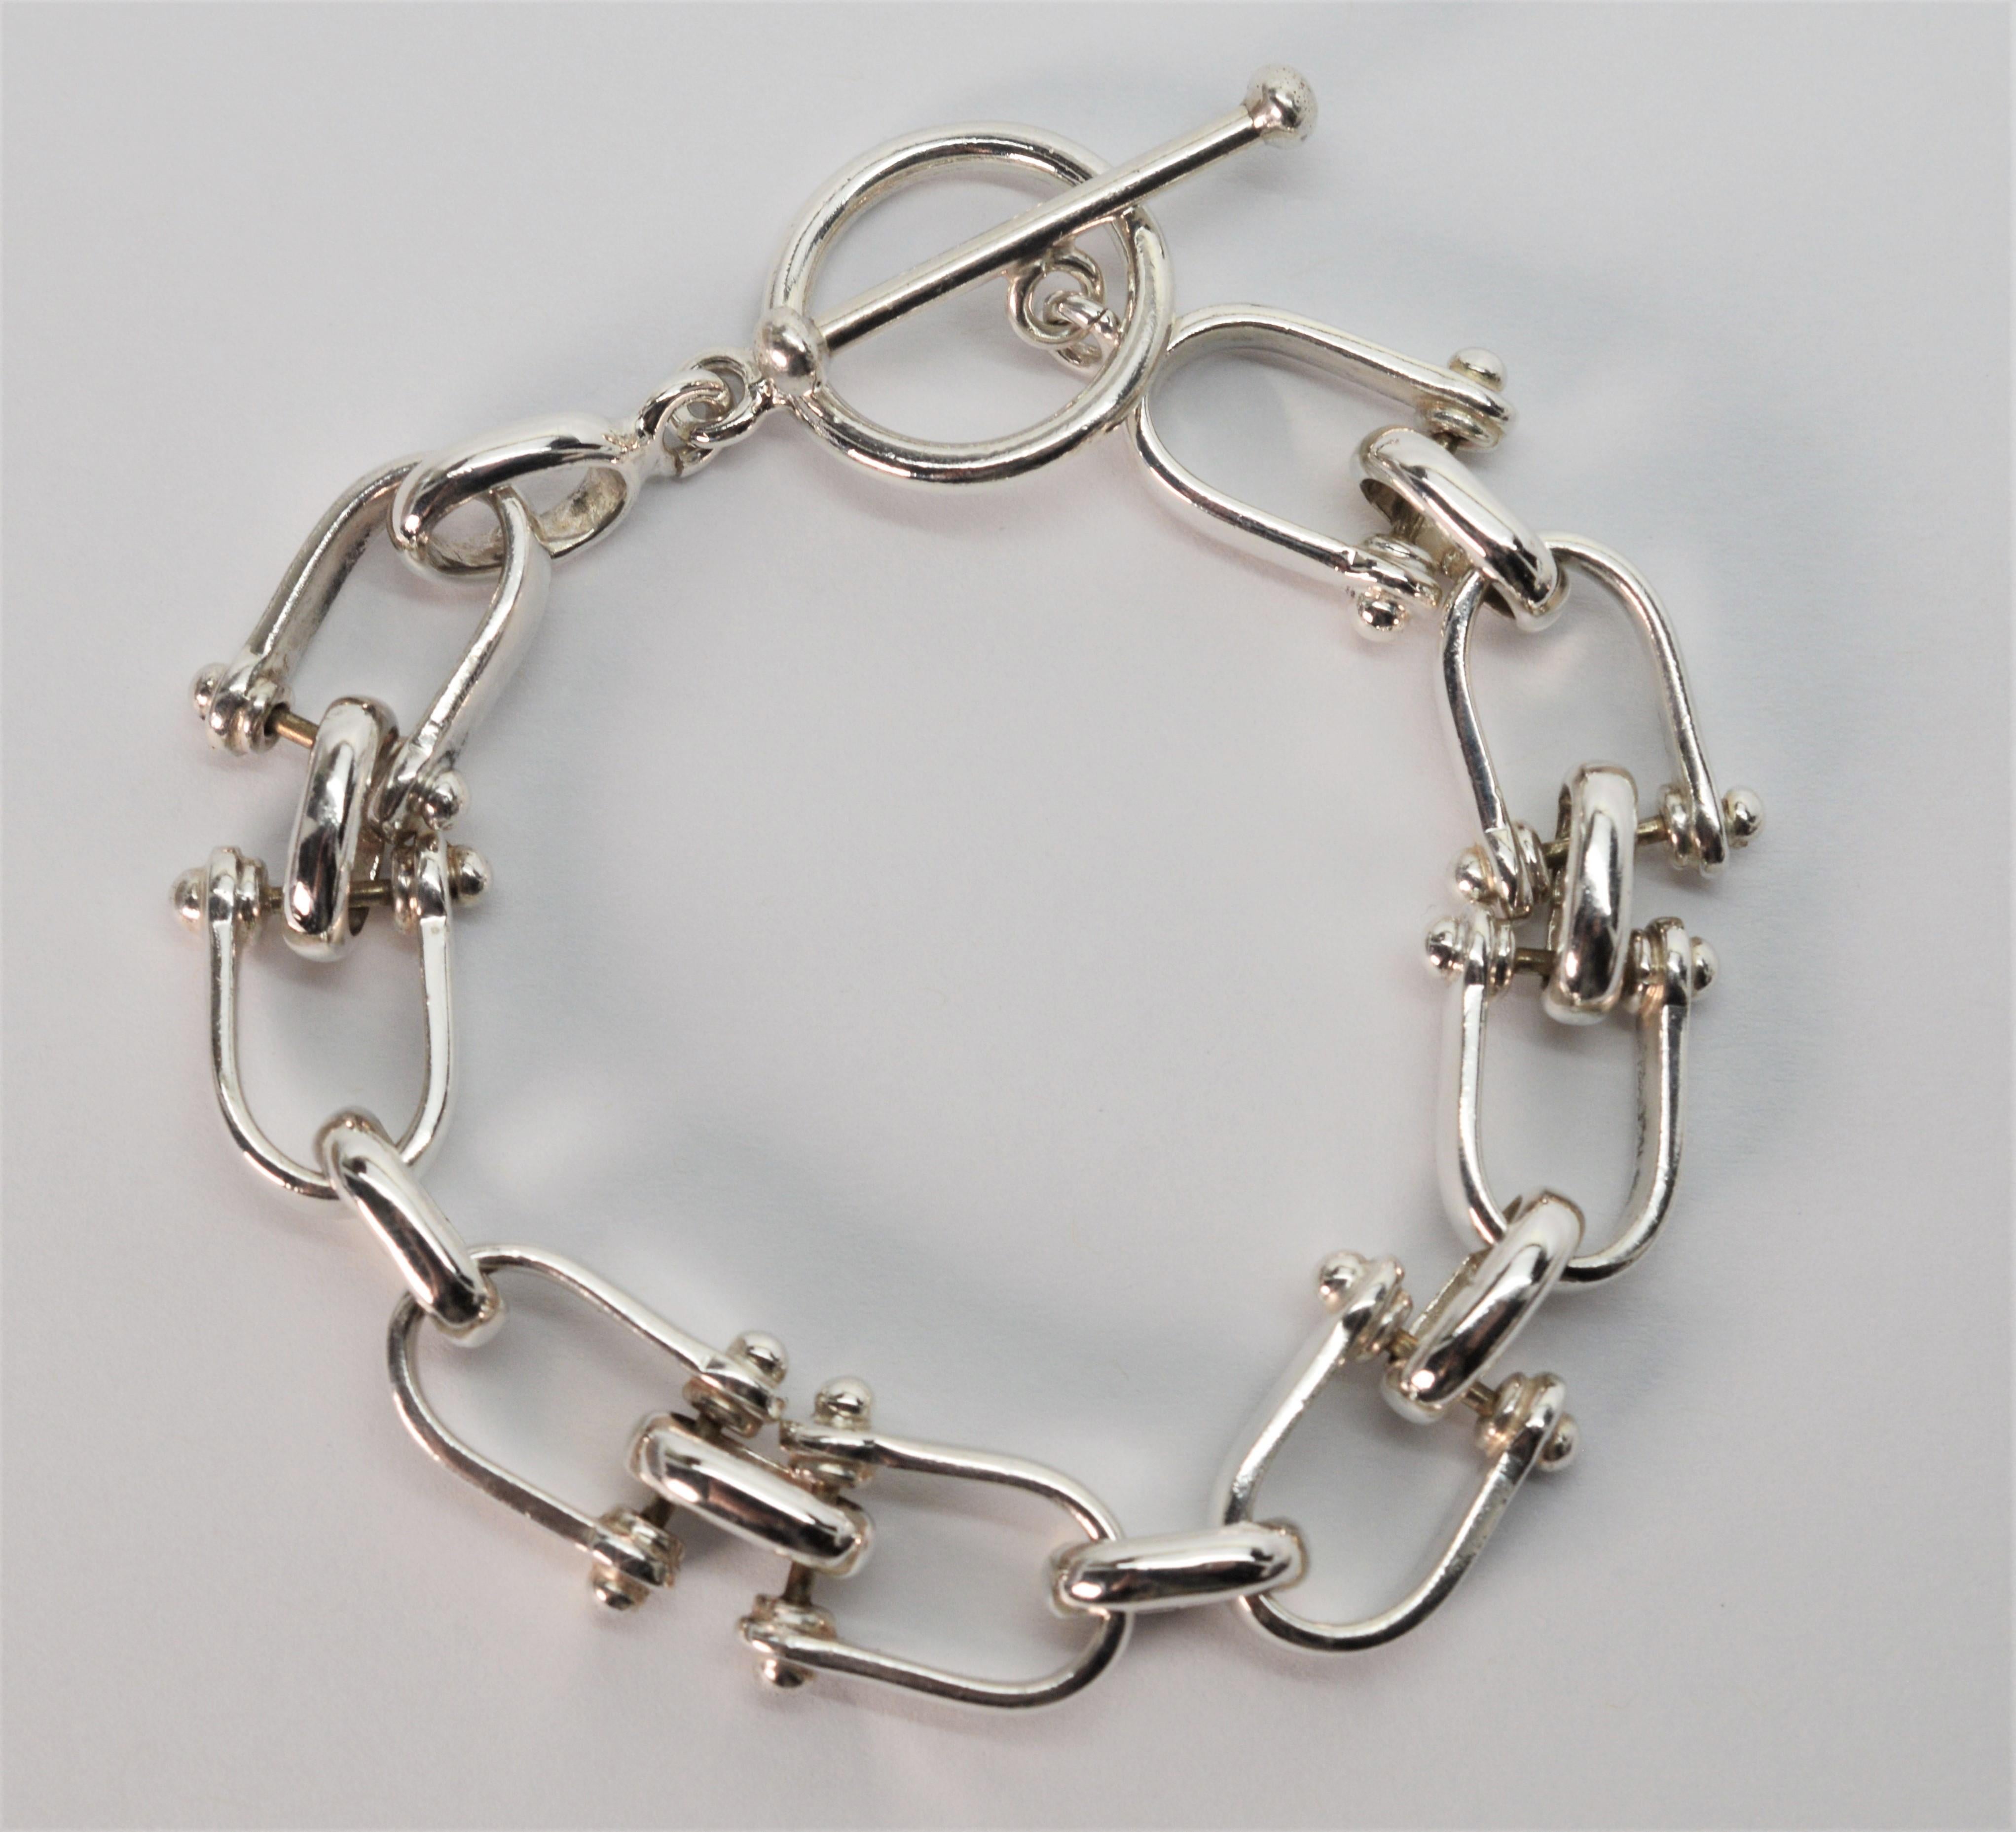 In sterling silver, the unique stirrup shaped links accentuate the hardware look of this equestrian inspired bracelet. 
Fitted with a large, easy toggle clasp, the bracelet length is 7 inches.  Gift boxed.